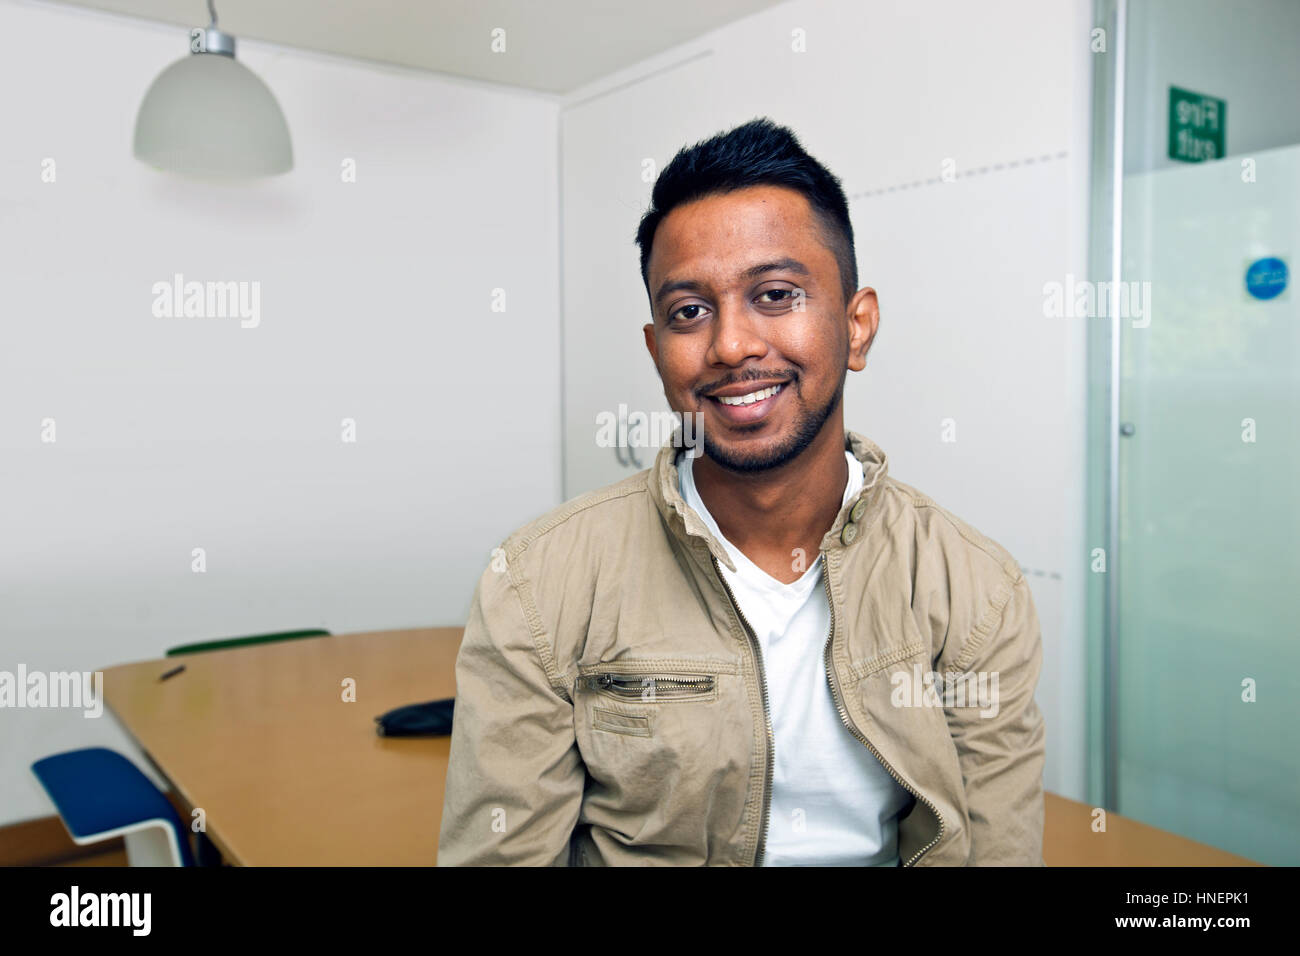 Young Indian man smiling at camera in his office Stock Photo